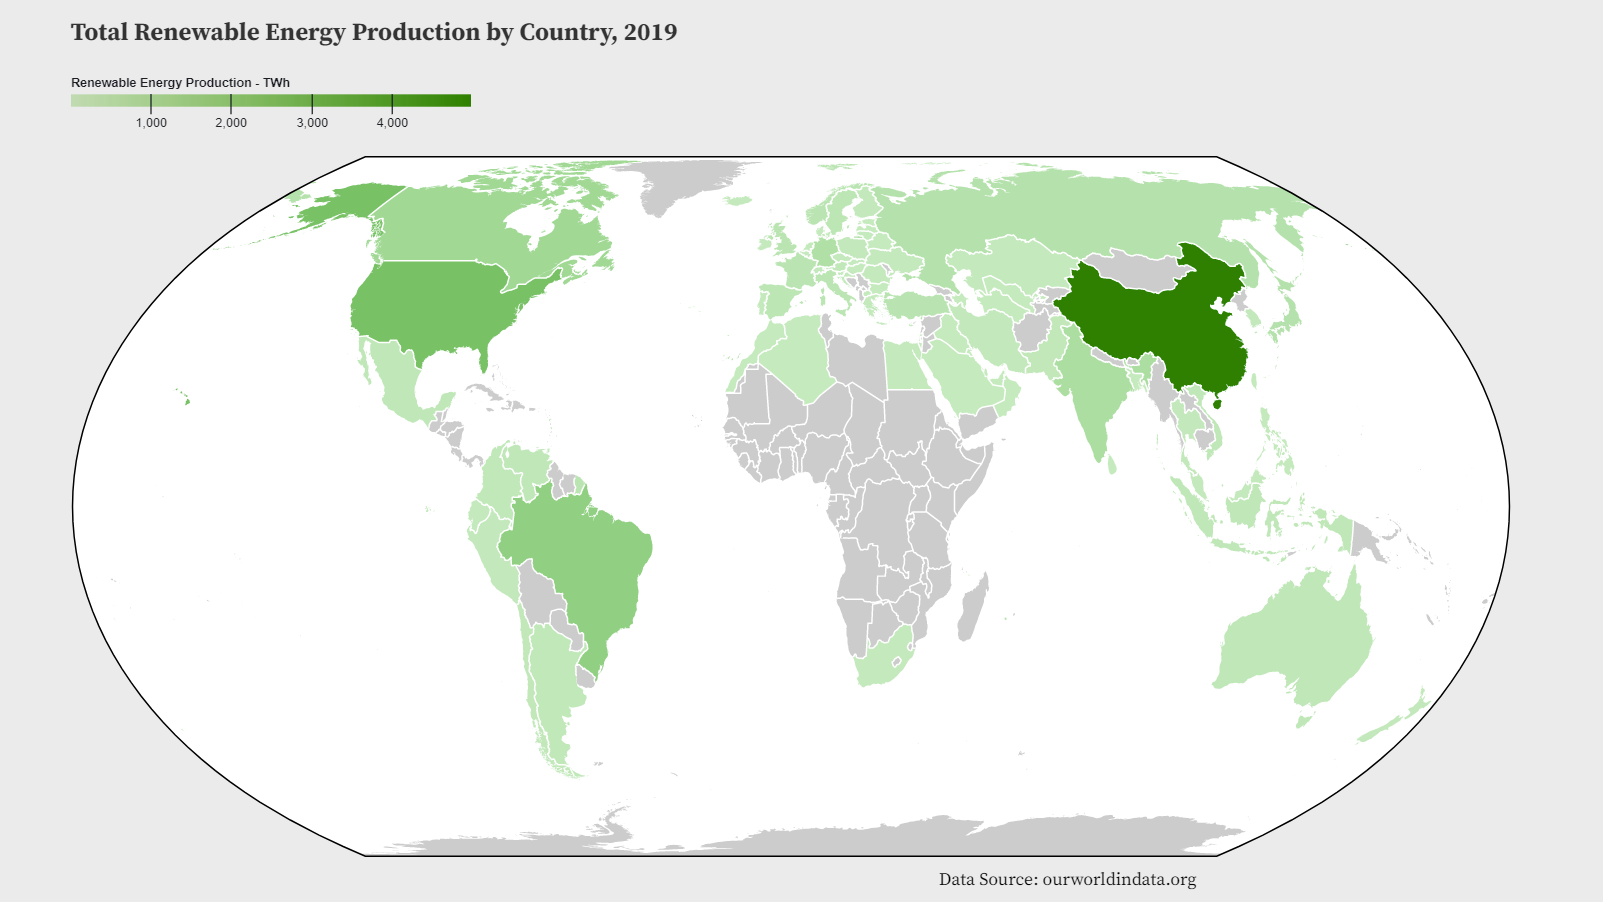 Map of the world showing renewable energy production in 2019